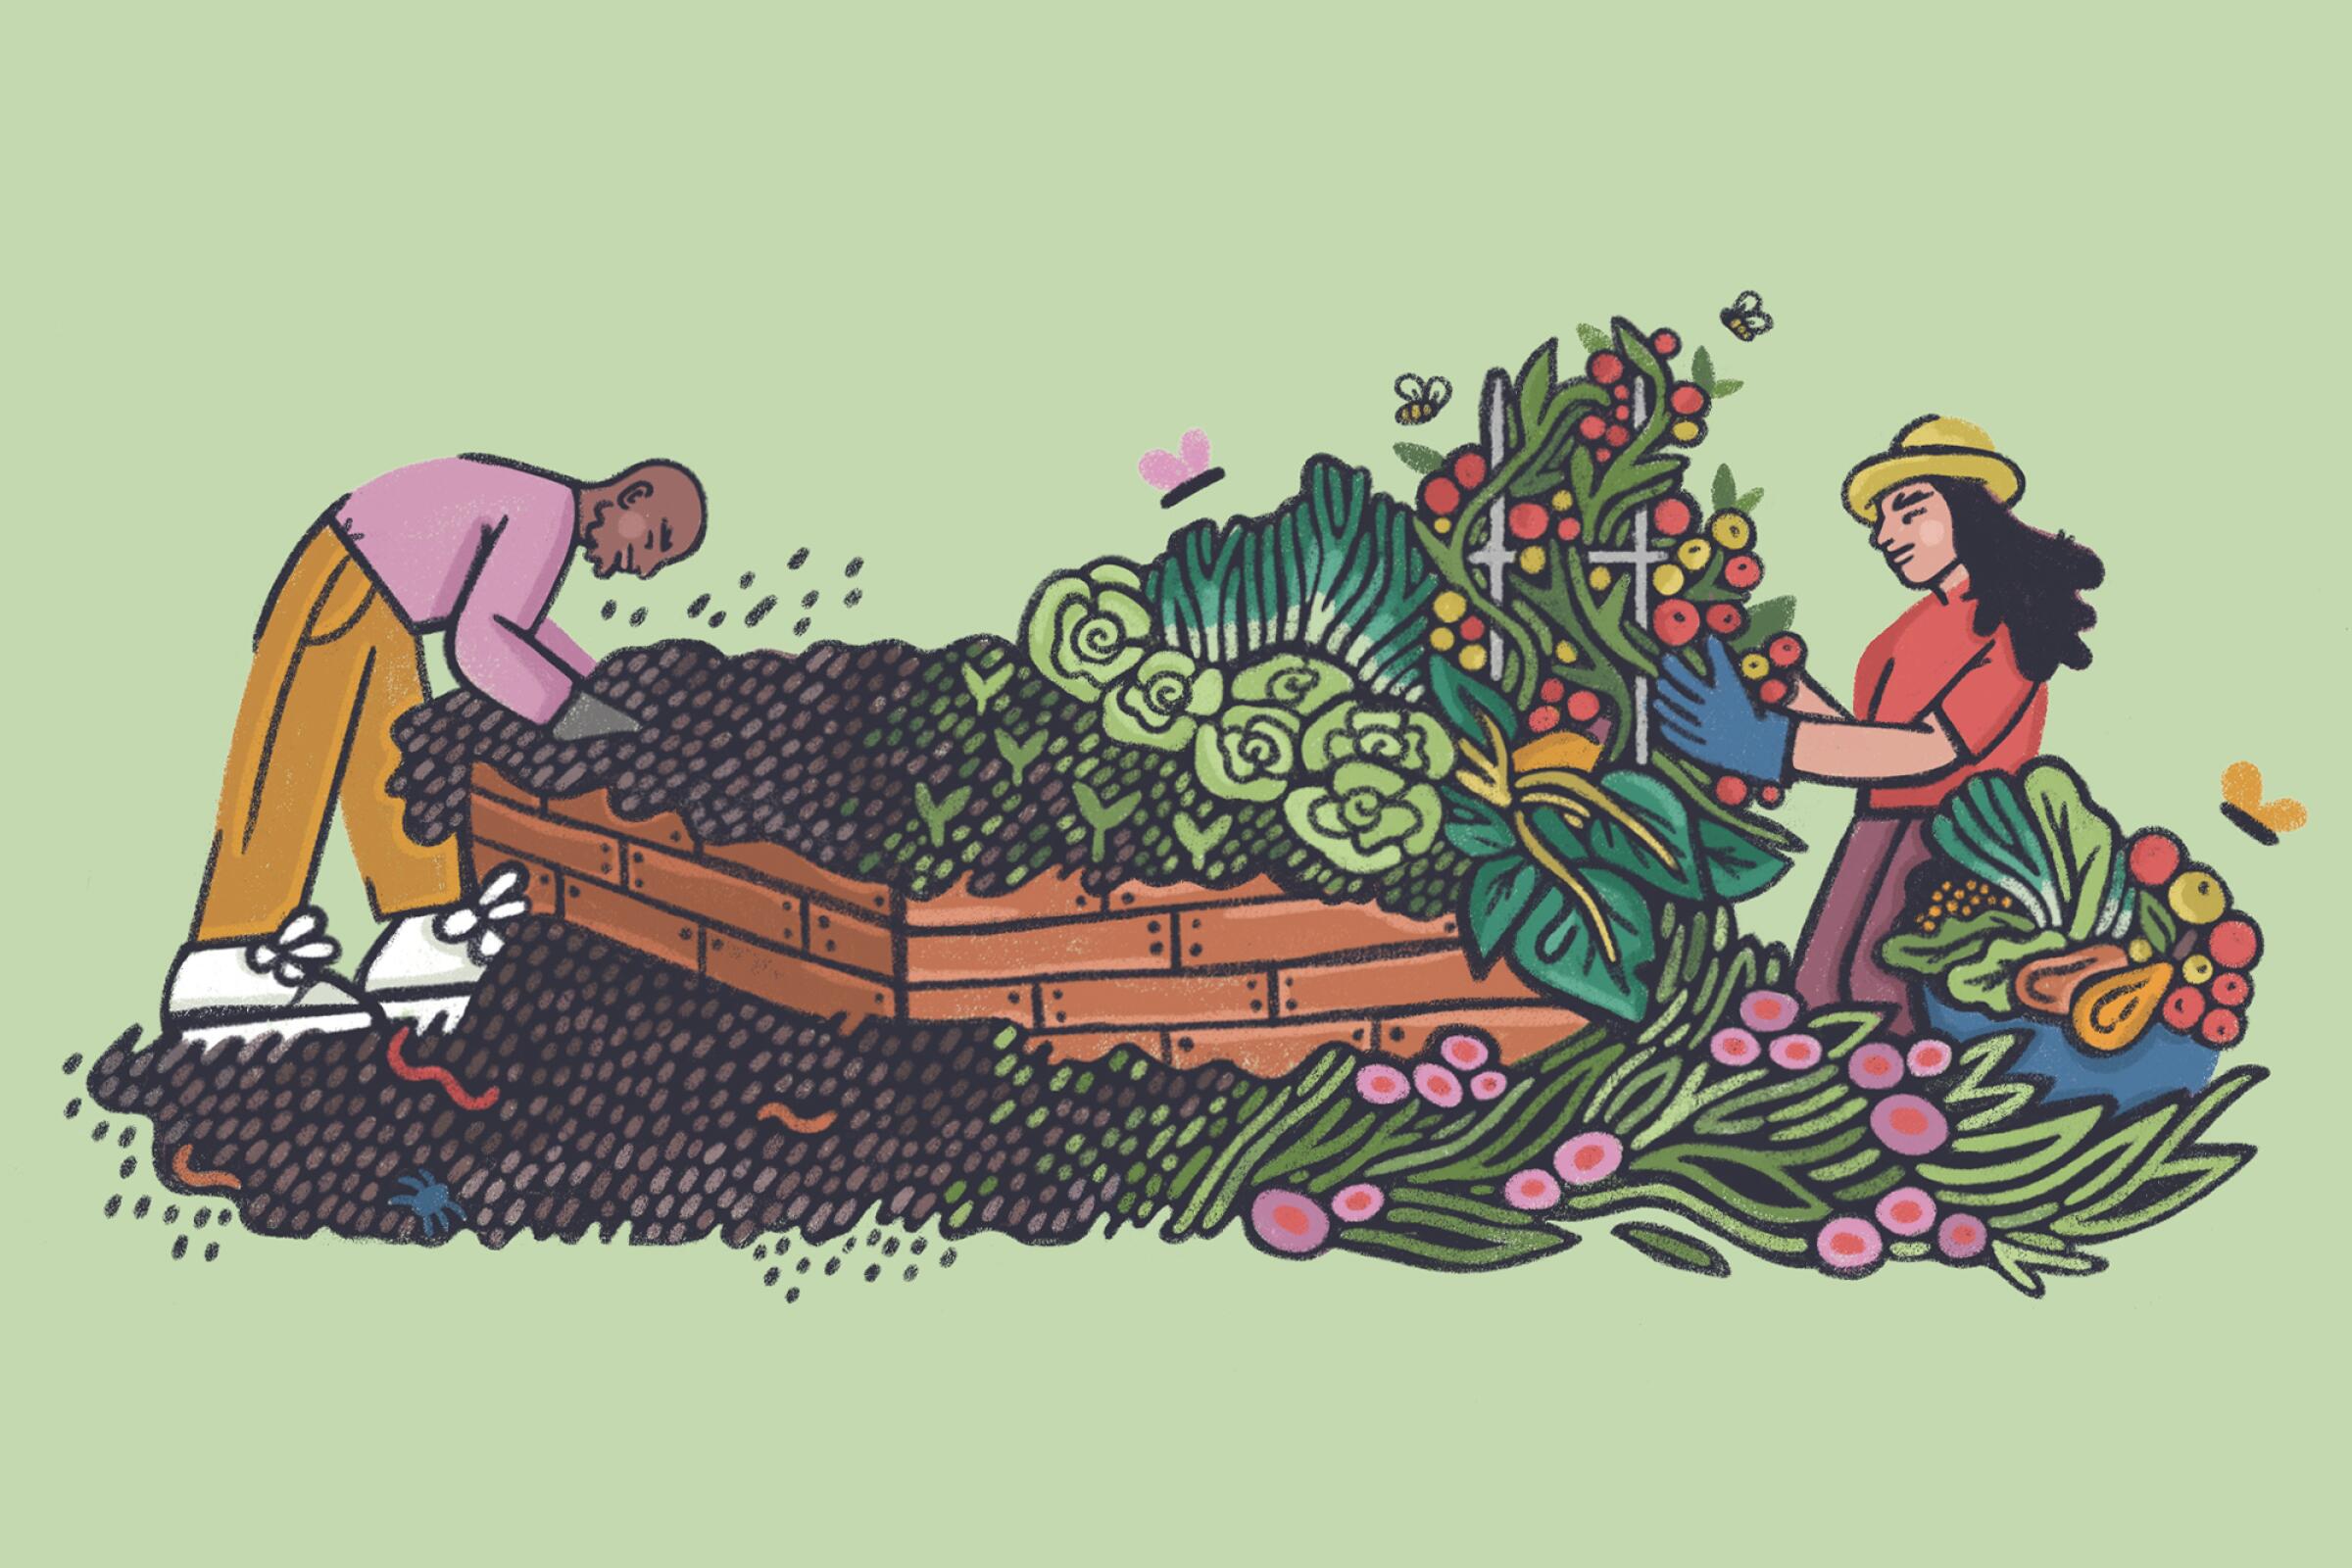 Illustration of two people in a garden composting